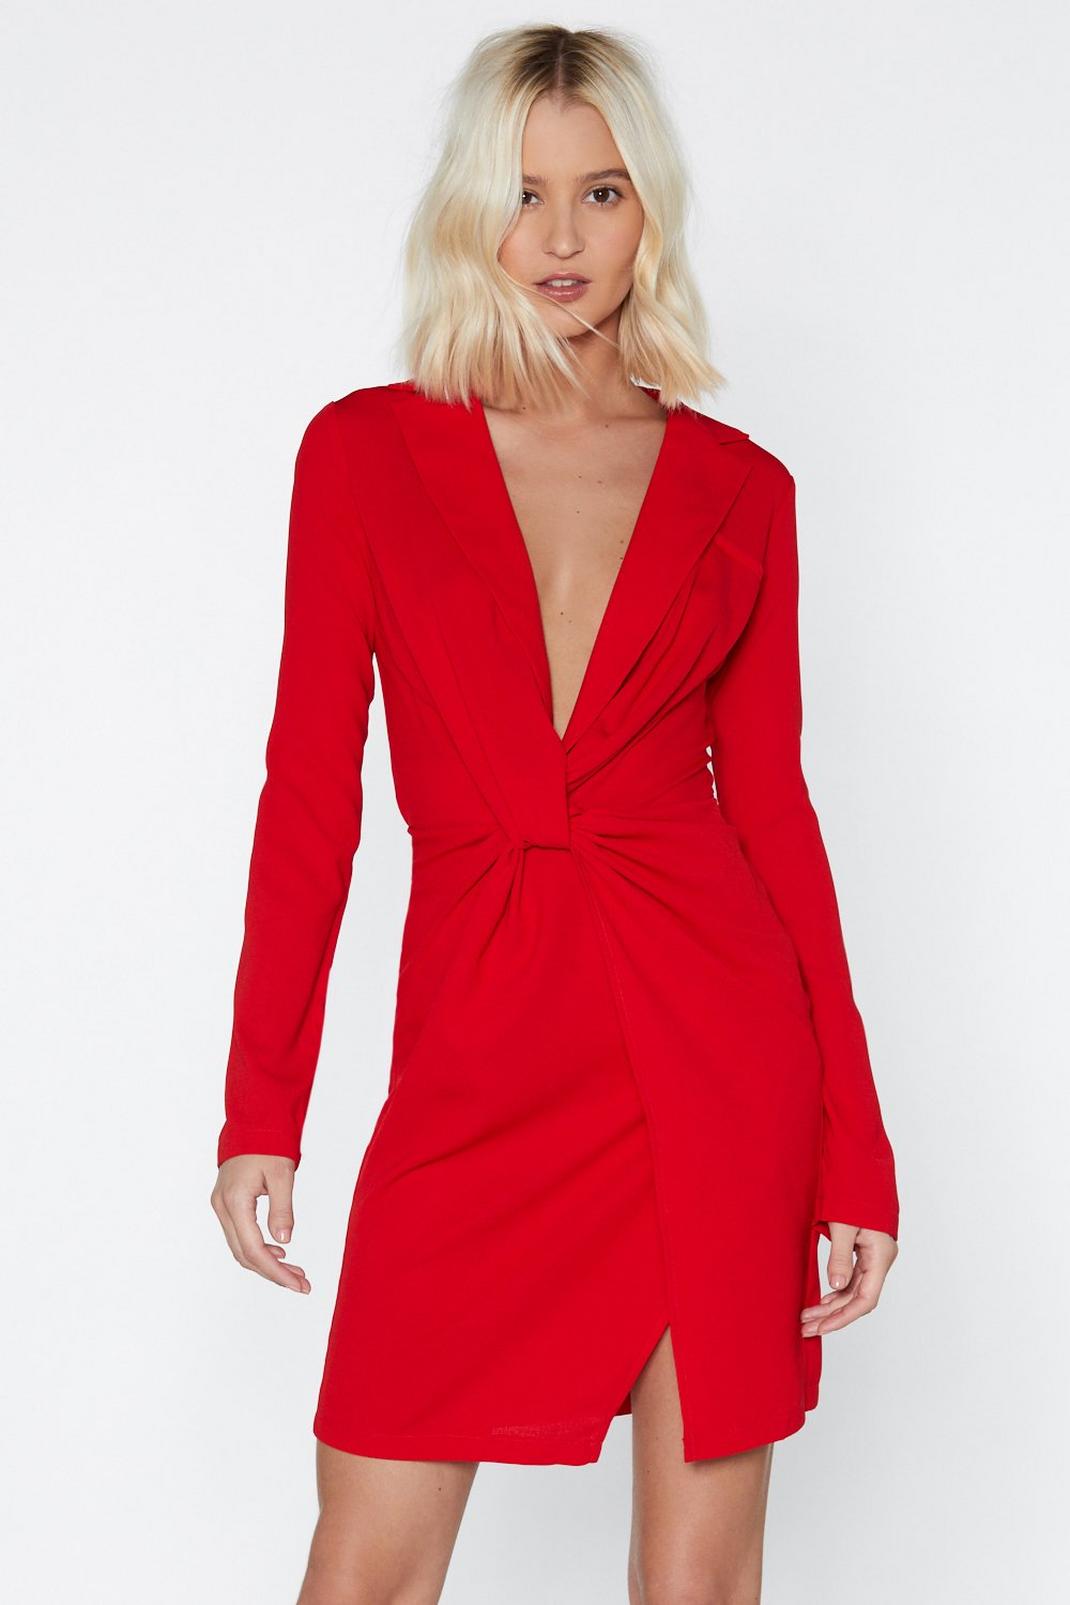 Love You Like a Twist-er Bodycon Dress image number 1